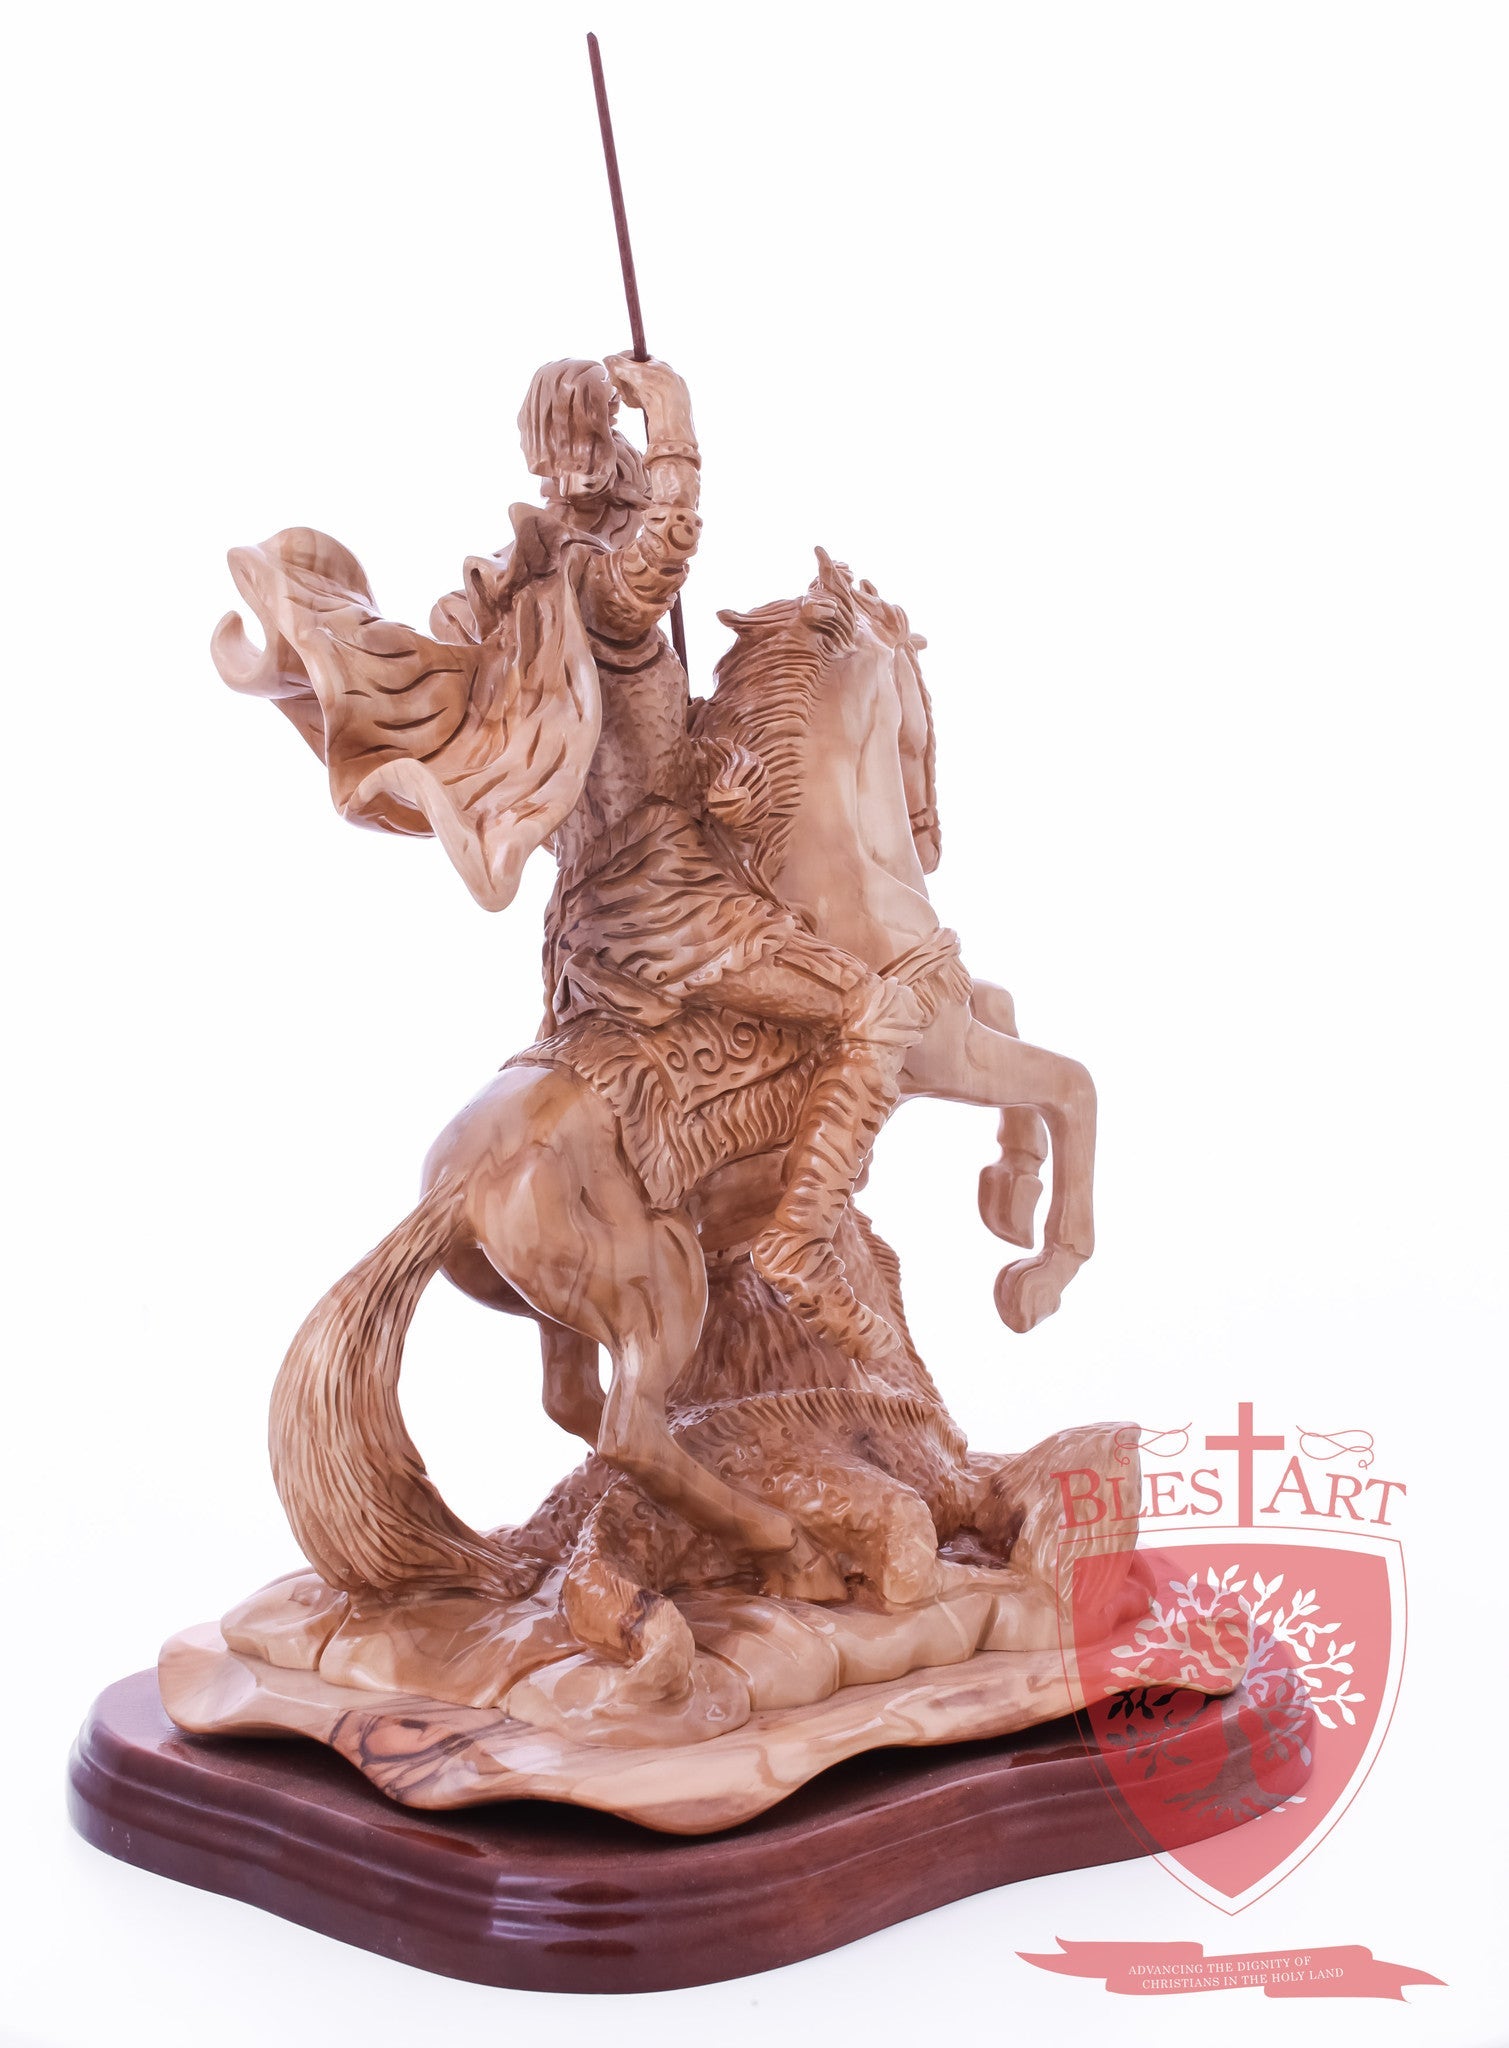 St. George defeating the dragon, Cathedral Quality, Size:  13.5" 10" 15"